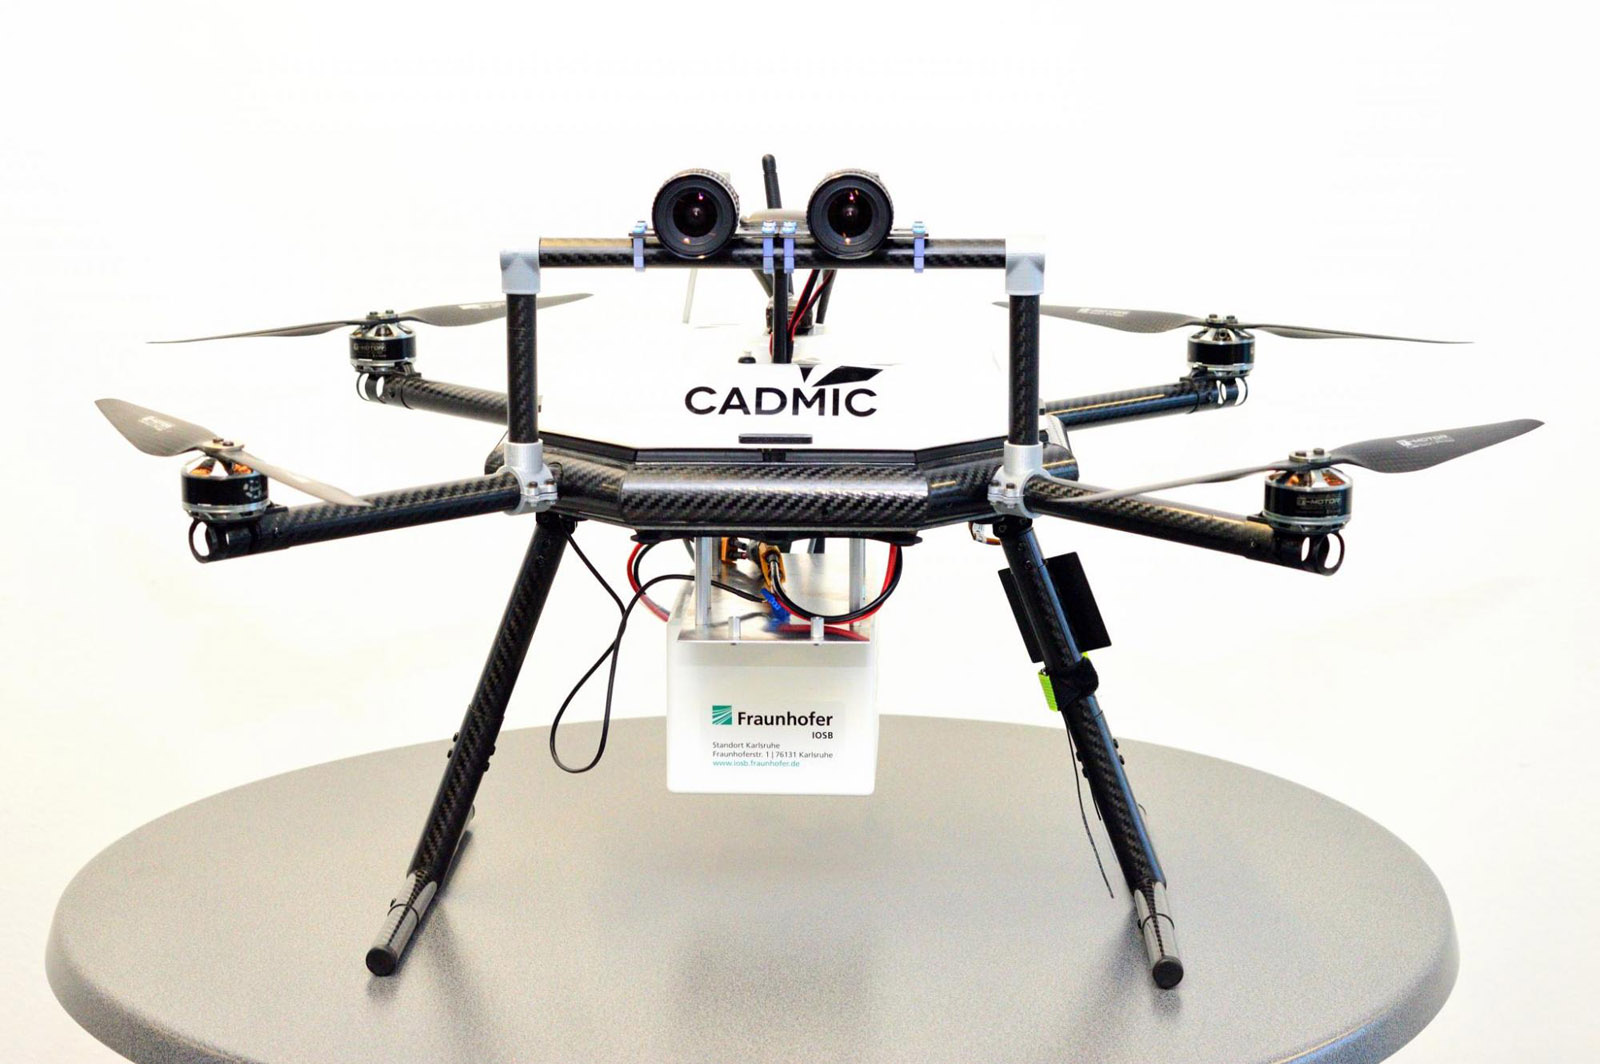 Drone with stereo camera. The small white box holds the embedded system, which evaluates the slightly offset images from the two cameras in real time in order to detect obstacles.